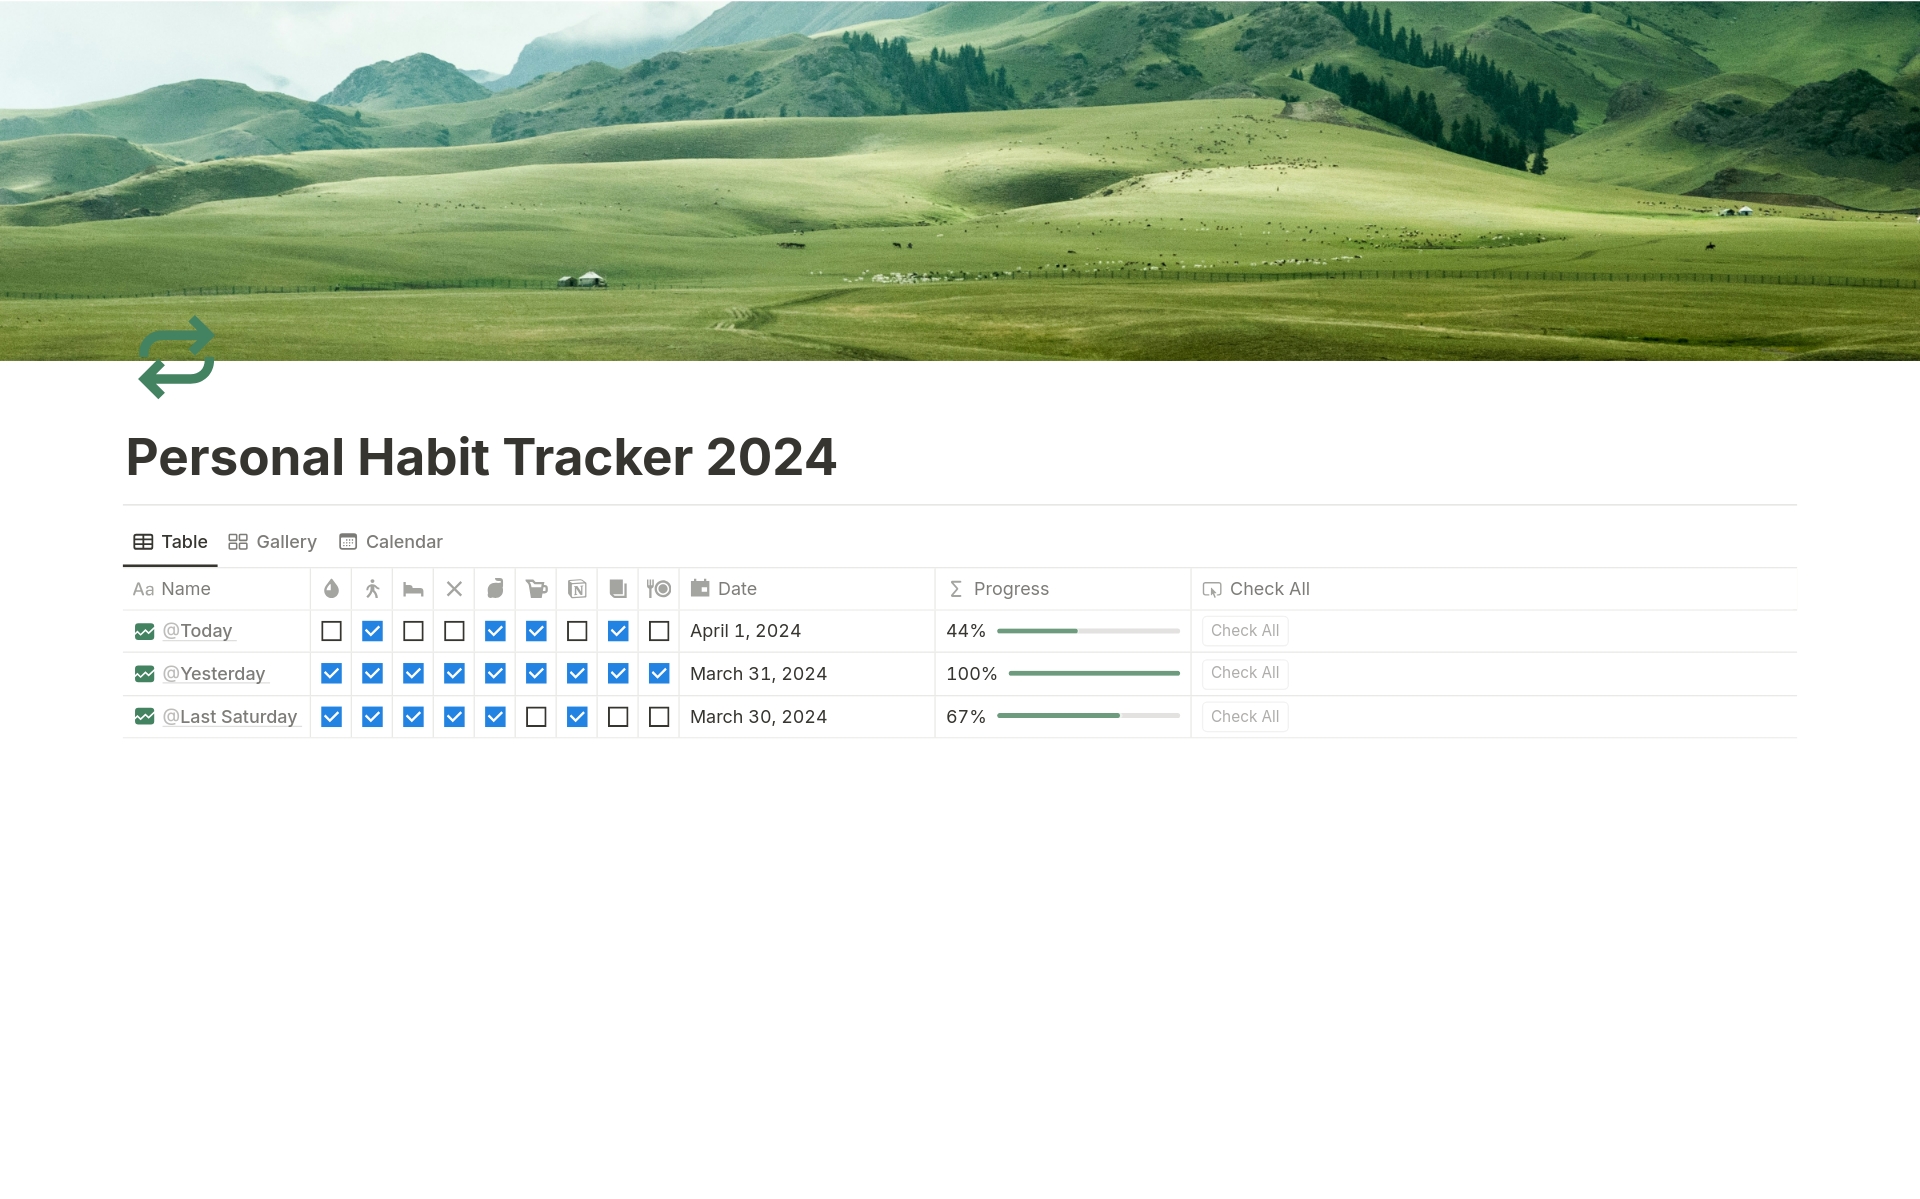 Introducing your comprehensive Tracker where you can monitor your daily activities with ease:

Track activities on a daily basis.
View progress percentage at a glance.
Easily navigate through monthly overviews.
Choose from multiple viewing options.